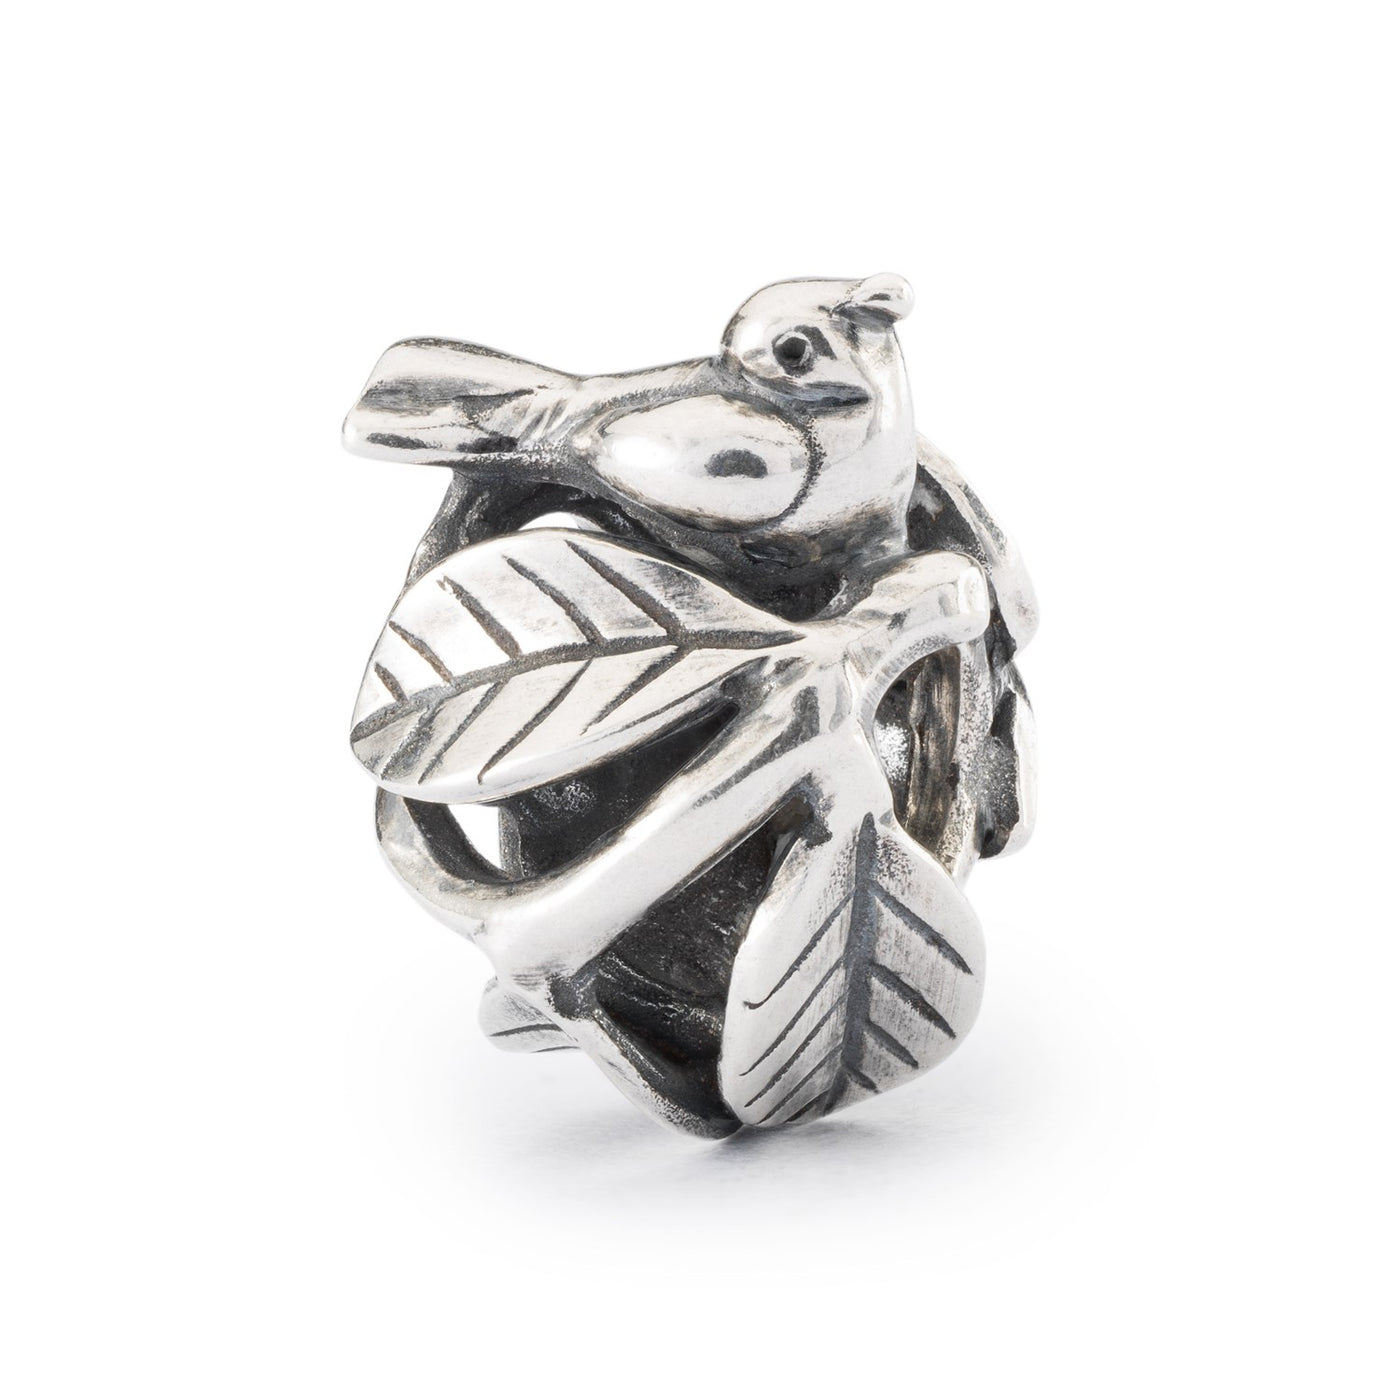 Birds Nest Bead featuring a intricate design of a nest with two birds sitting on top. The bead is made of sterling silver and has a round shape.